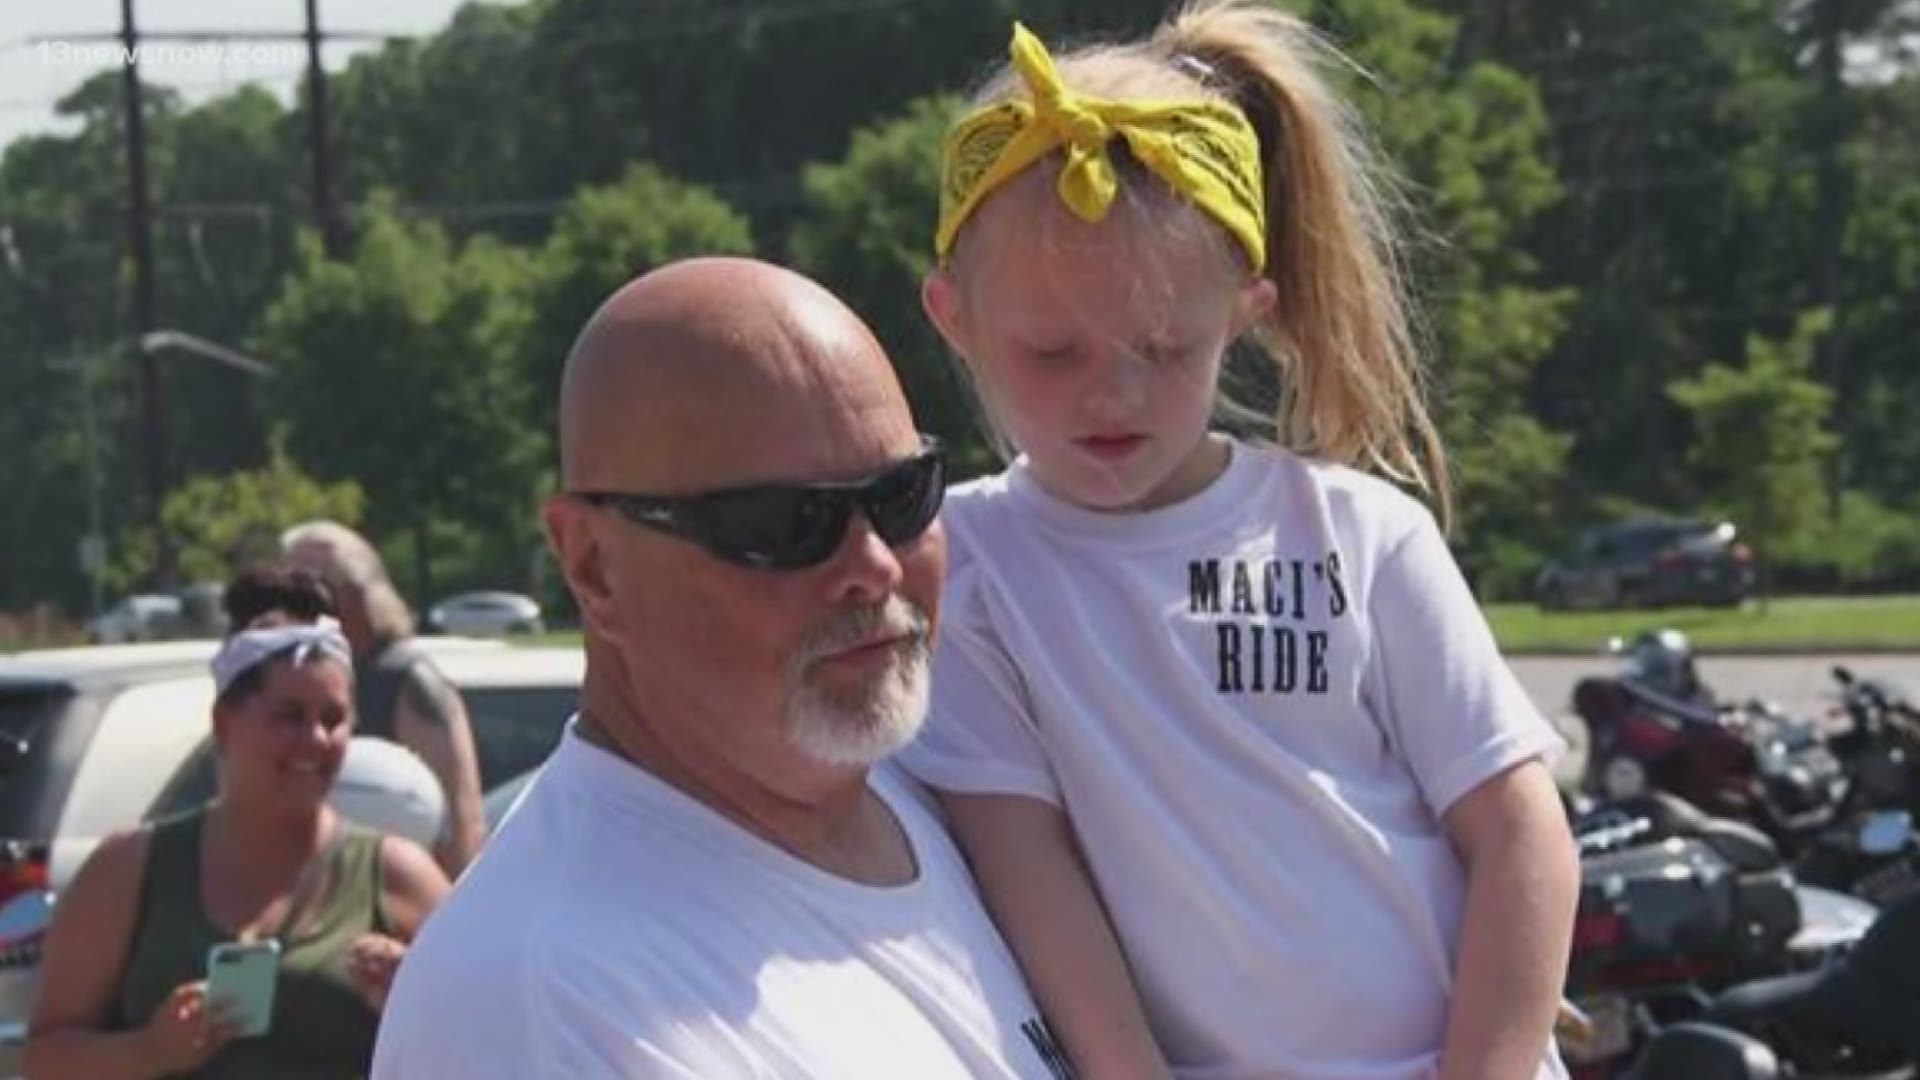 After seeing how the Tidewater Autism Society helped his granddaughter Maci, Tom Gorney organized the first Maci’s Ride in October 2015 with 100% of the proceeds benefiting the organization.